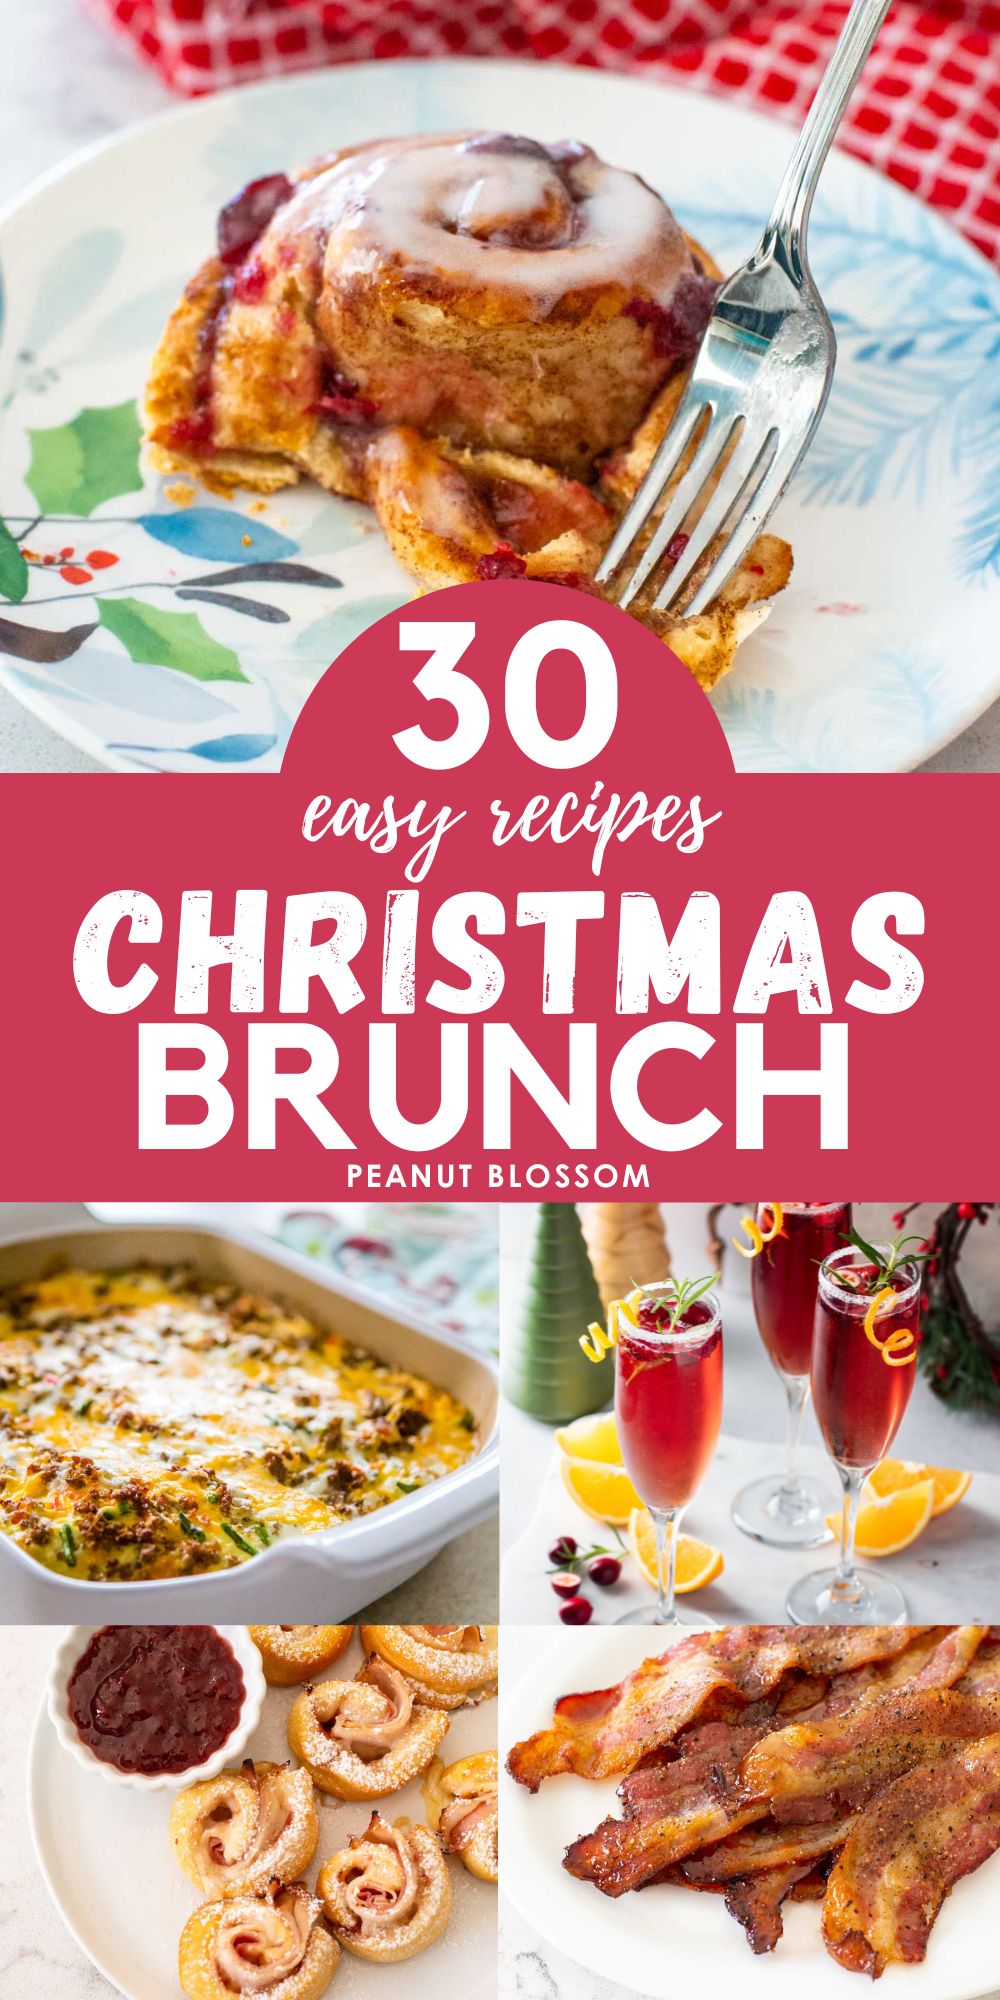 The photo collage shows 5 easy recipes for Christmas brunch.